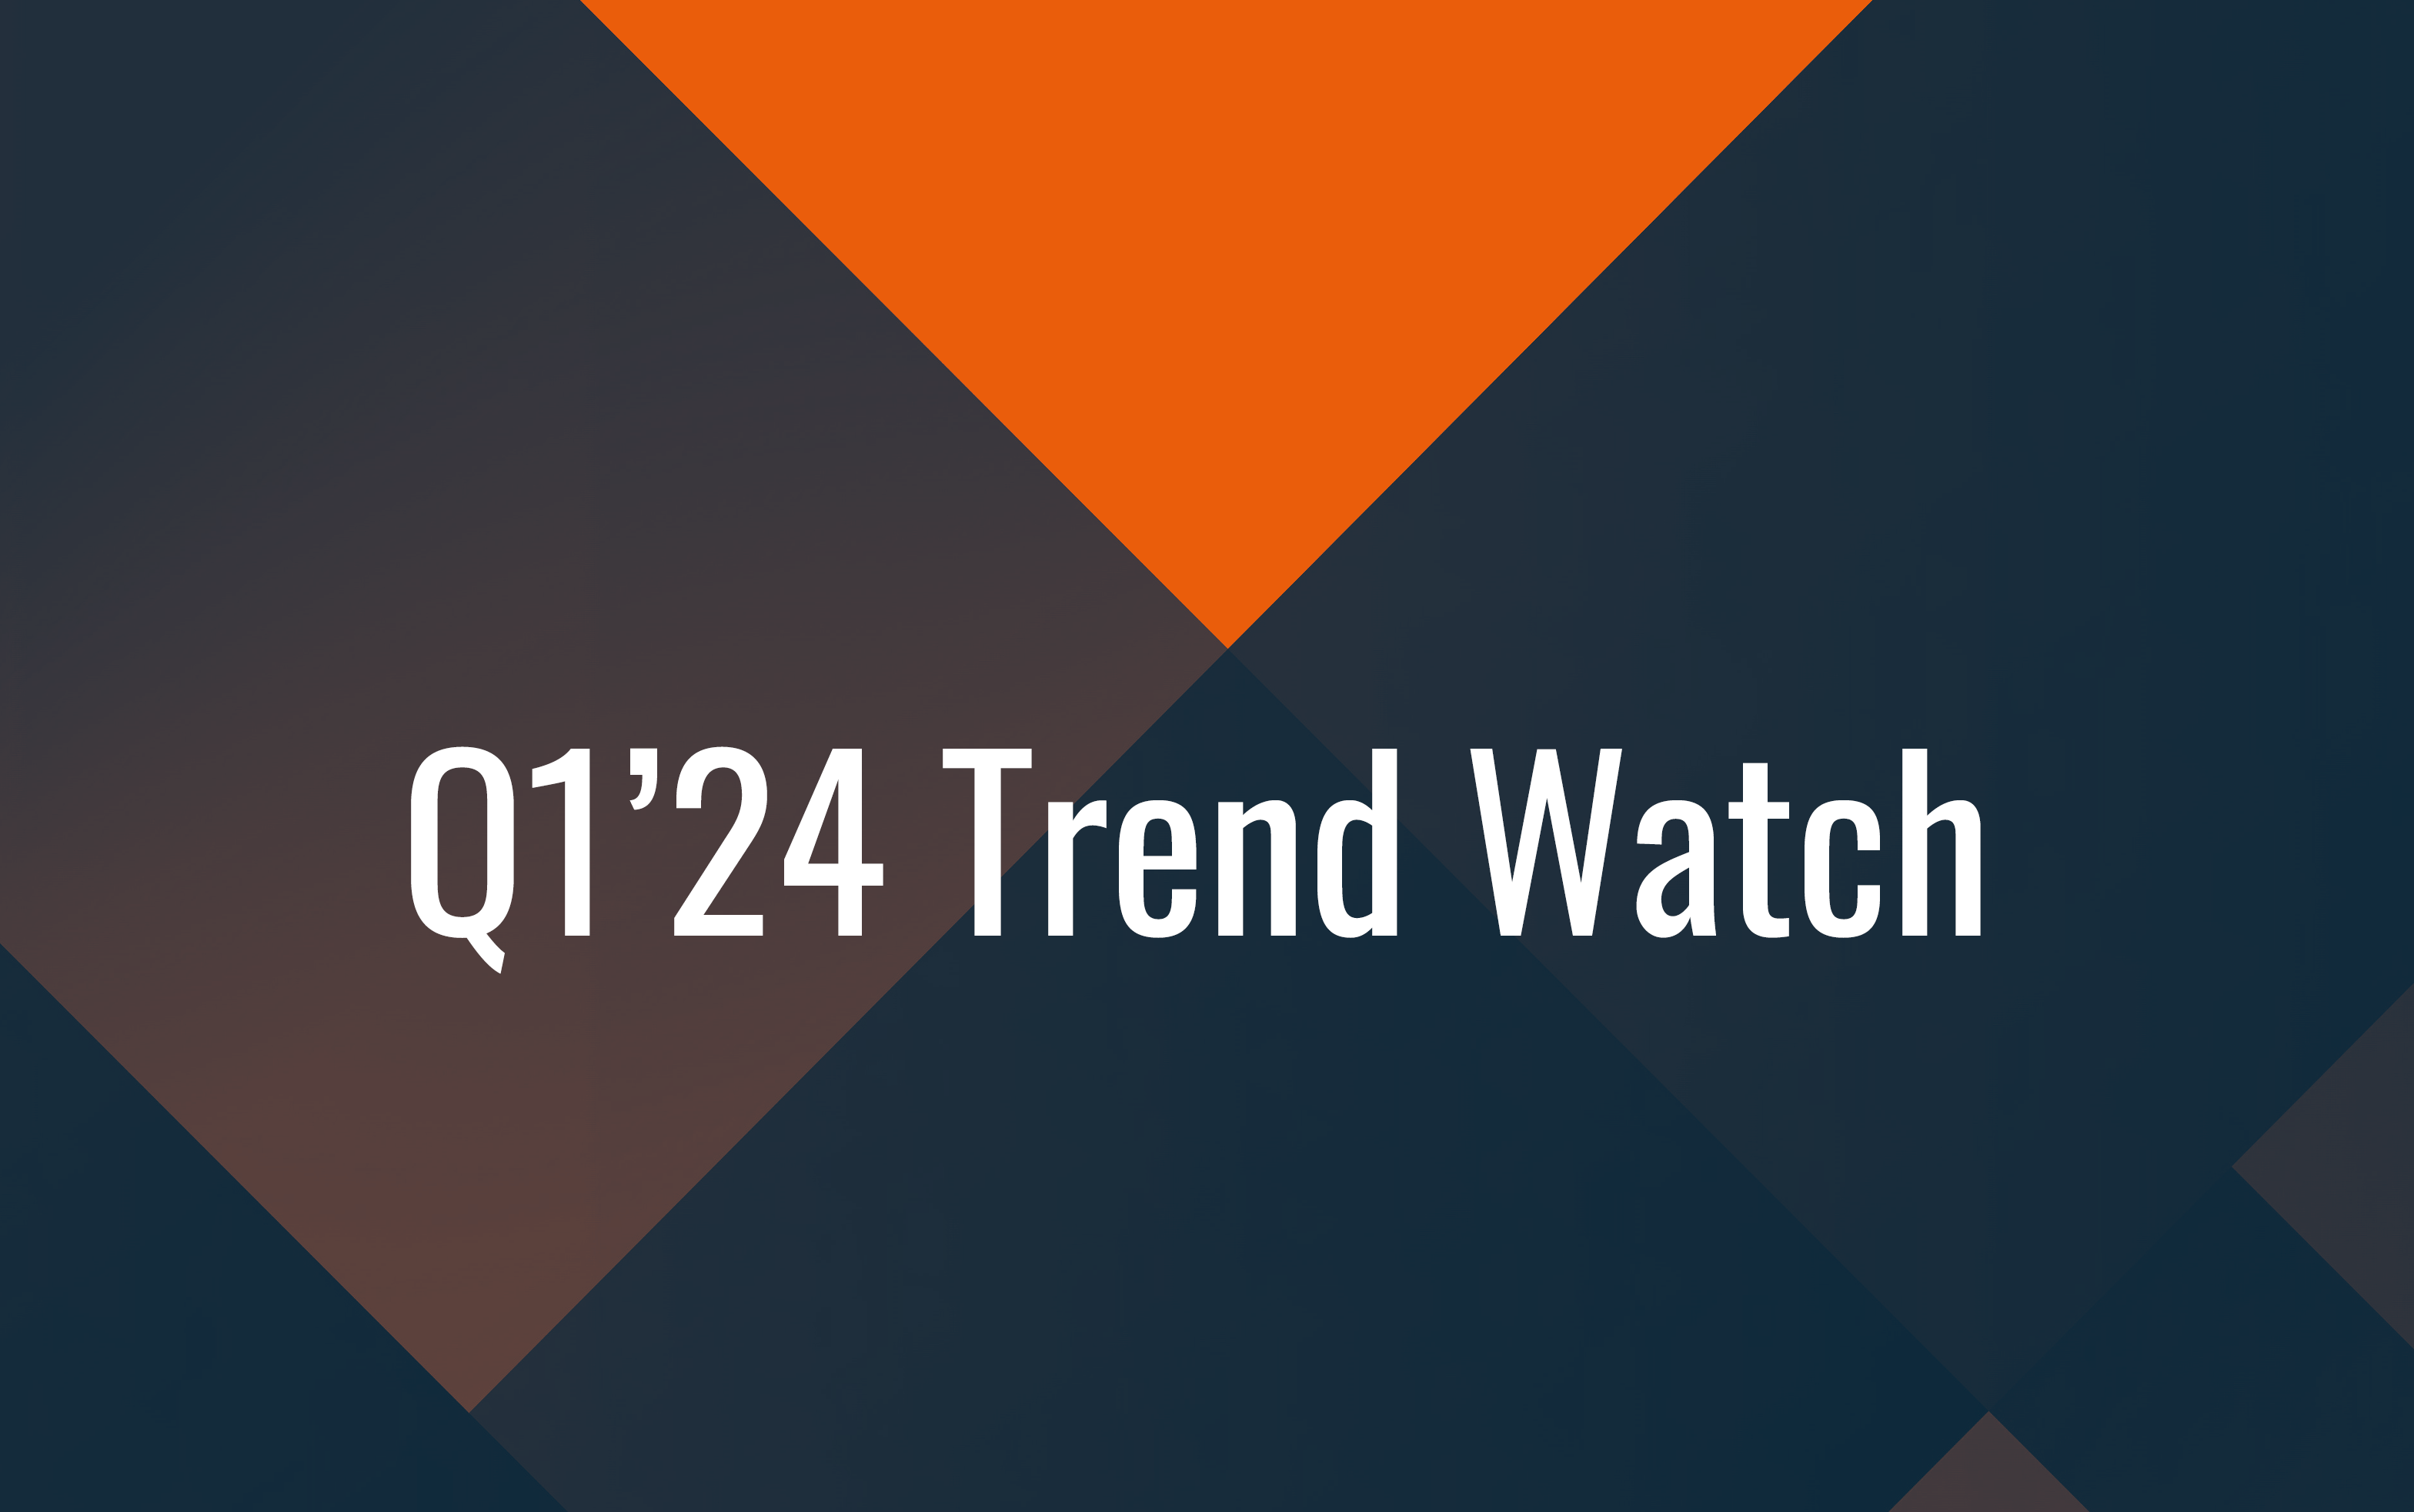 Q1’24 Trend Watch: Steel, Cement, Energy, China & Europe